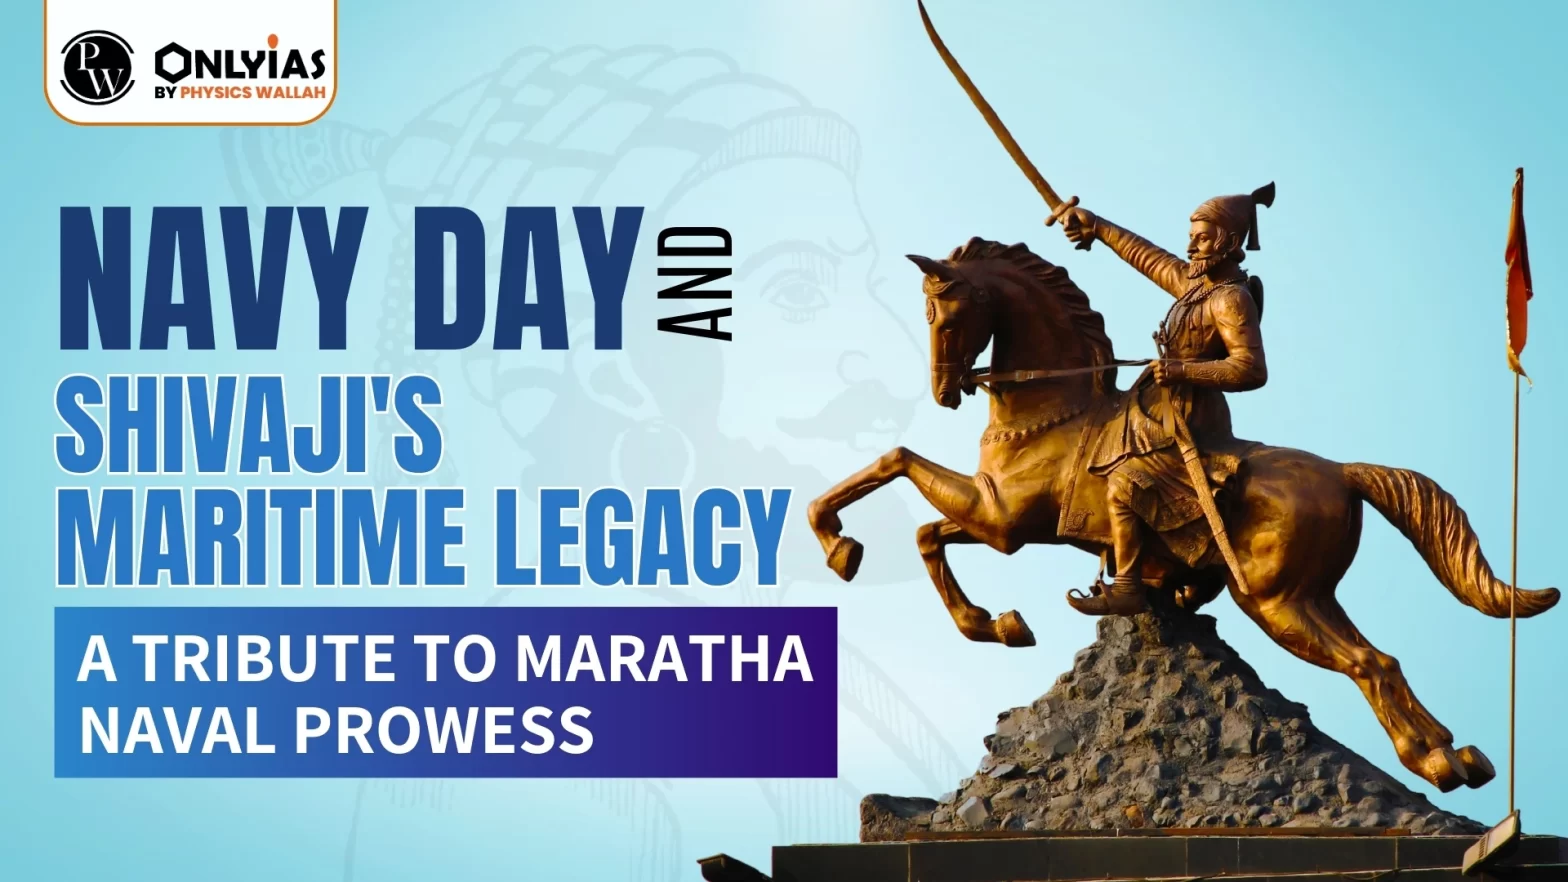 Navy Day and Shivaji’s Maritime Legacy: A Tribute to Maratha Naval Prowess